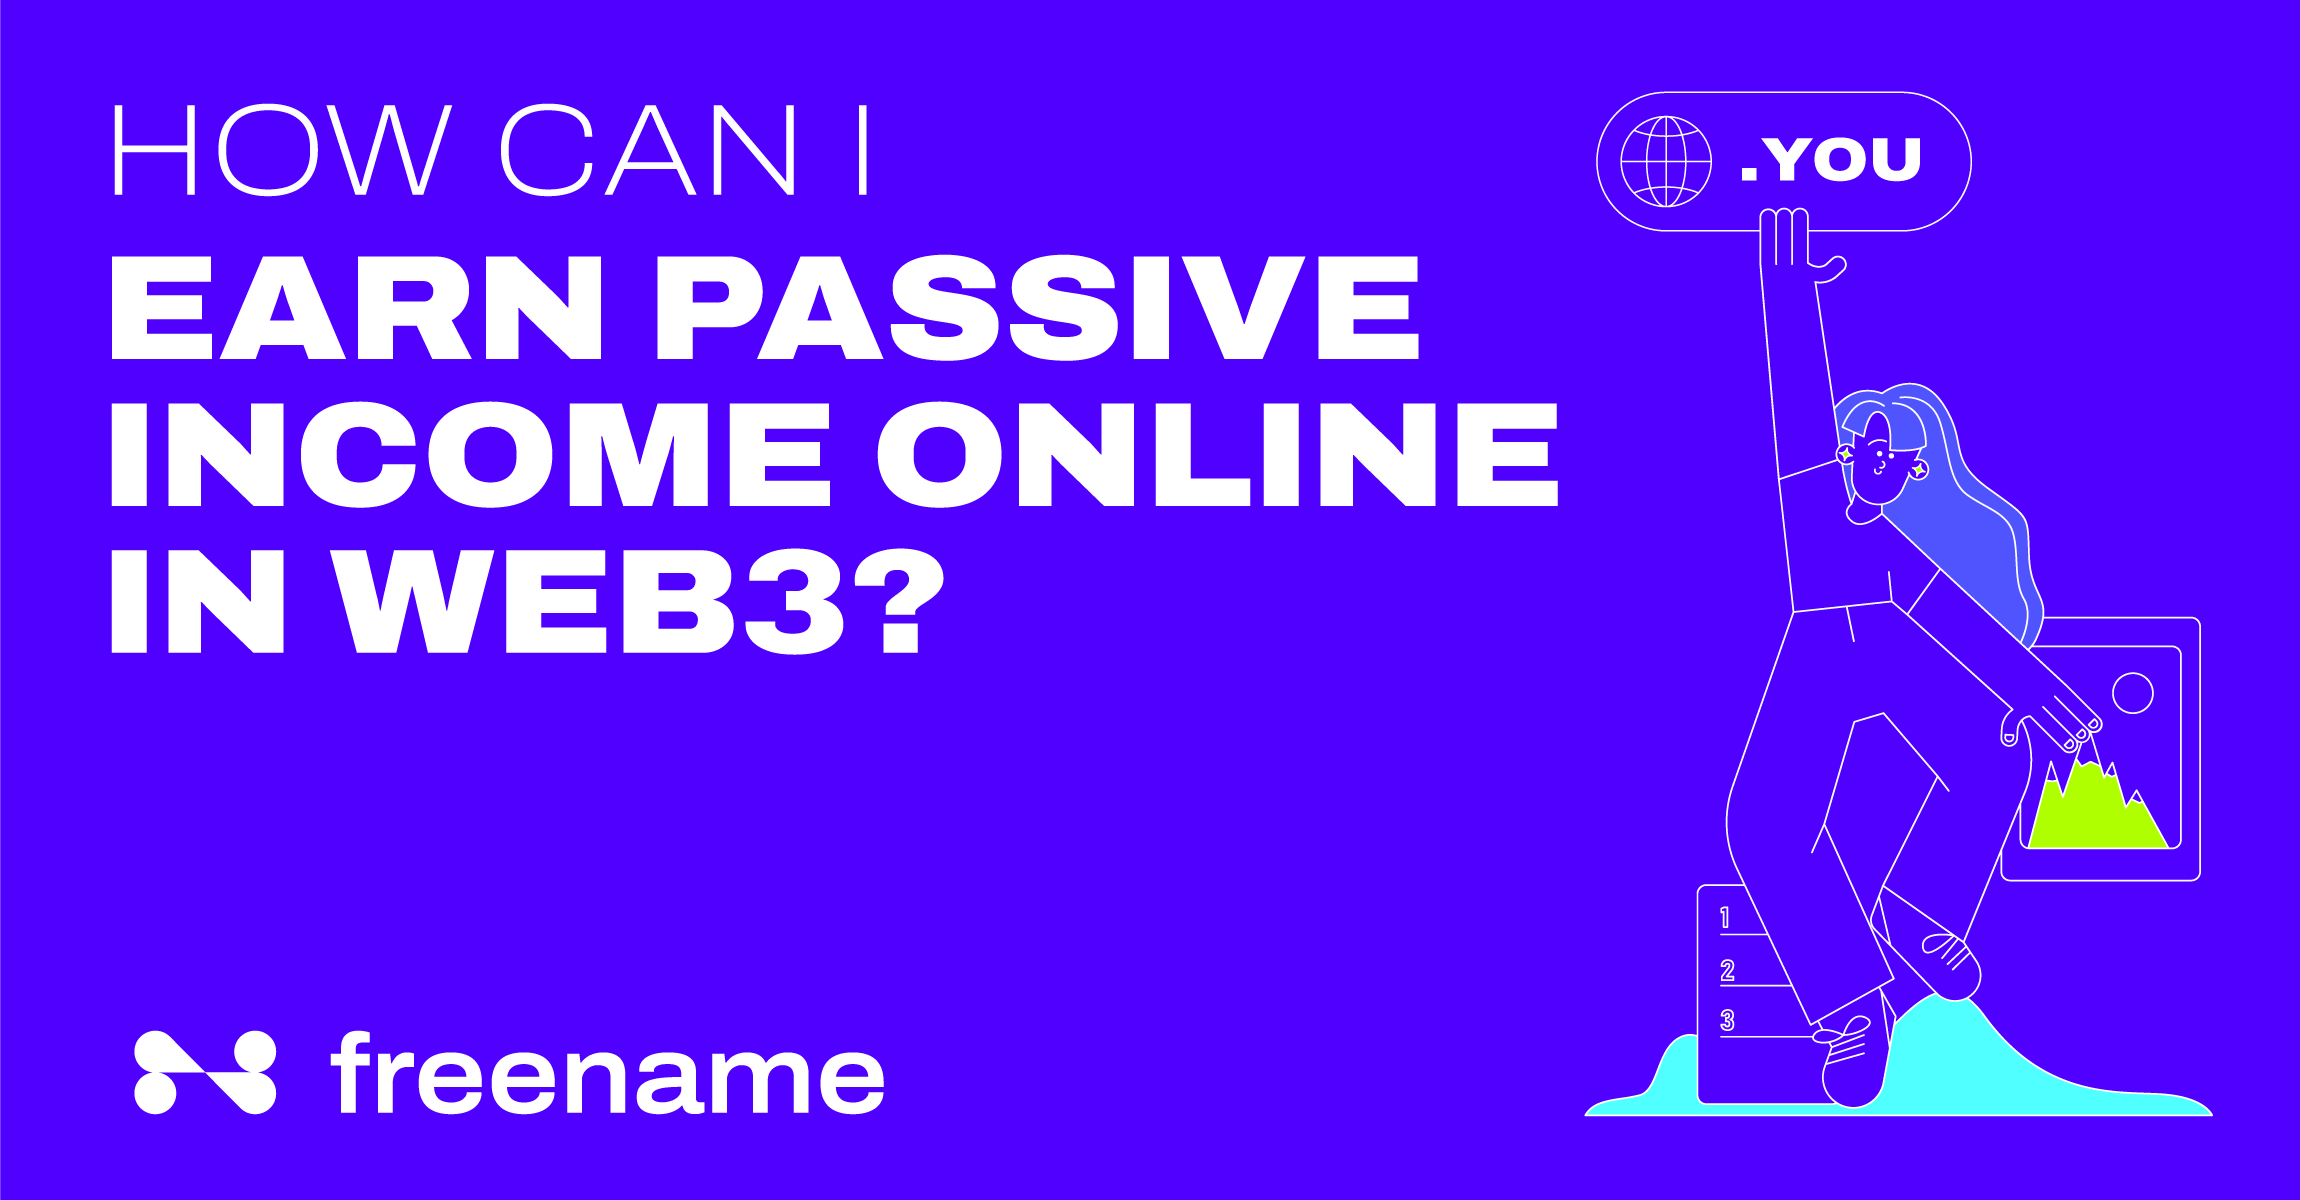 How can I Earn Passive Income Online in Web3?